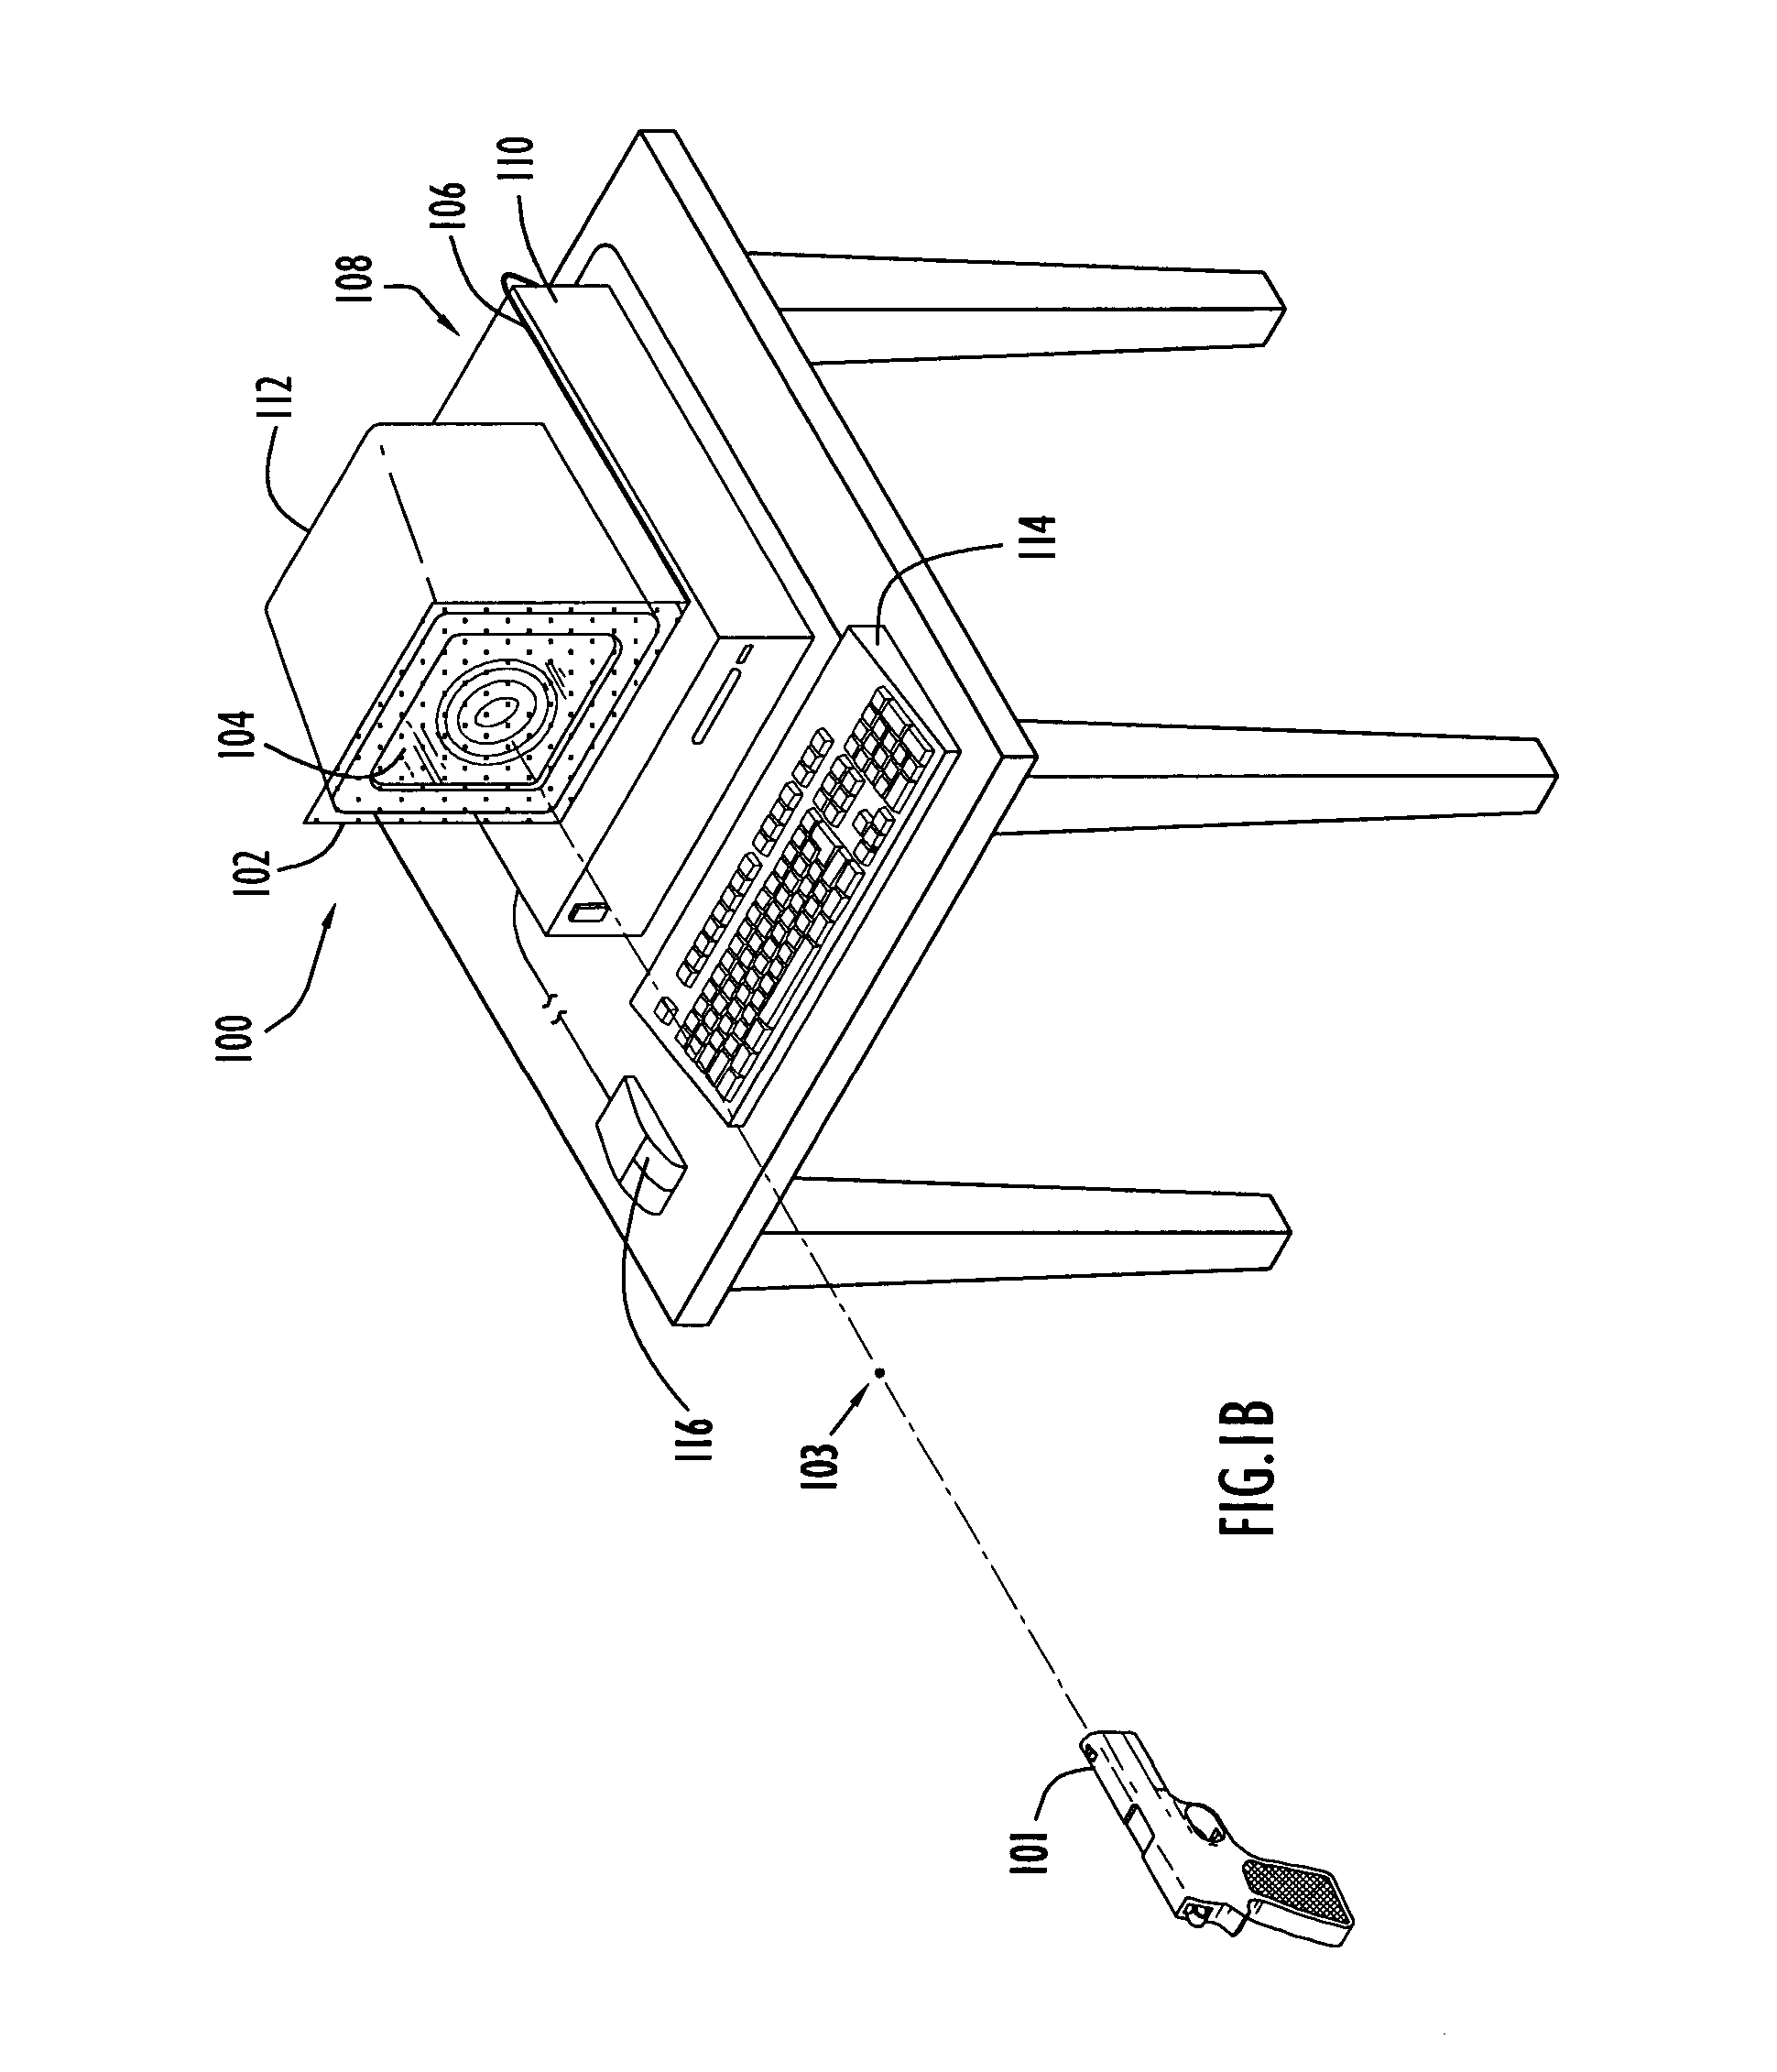 Target system and method for ascertaining target impact locations of a projectile propelled from a soft air type firearm